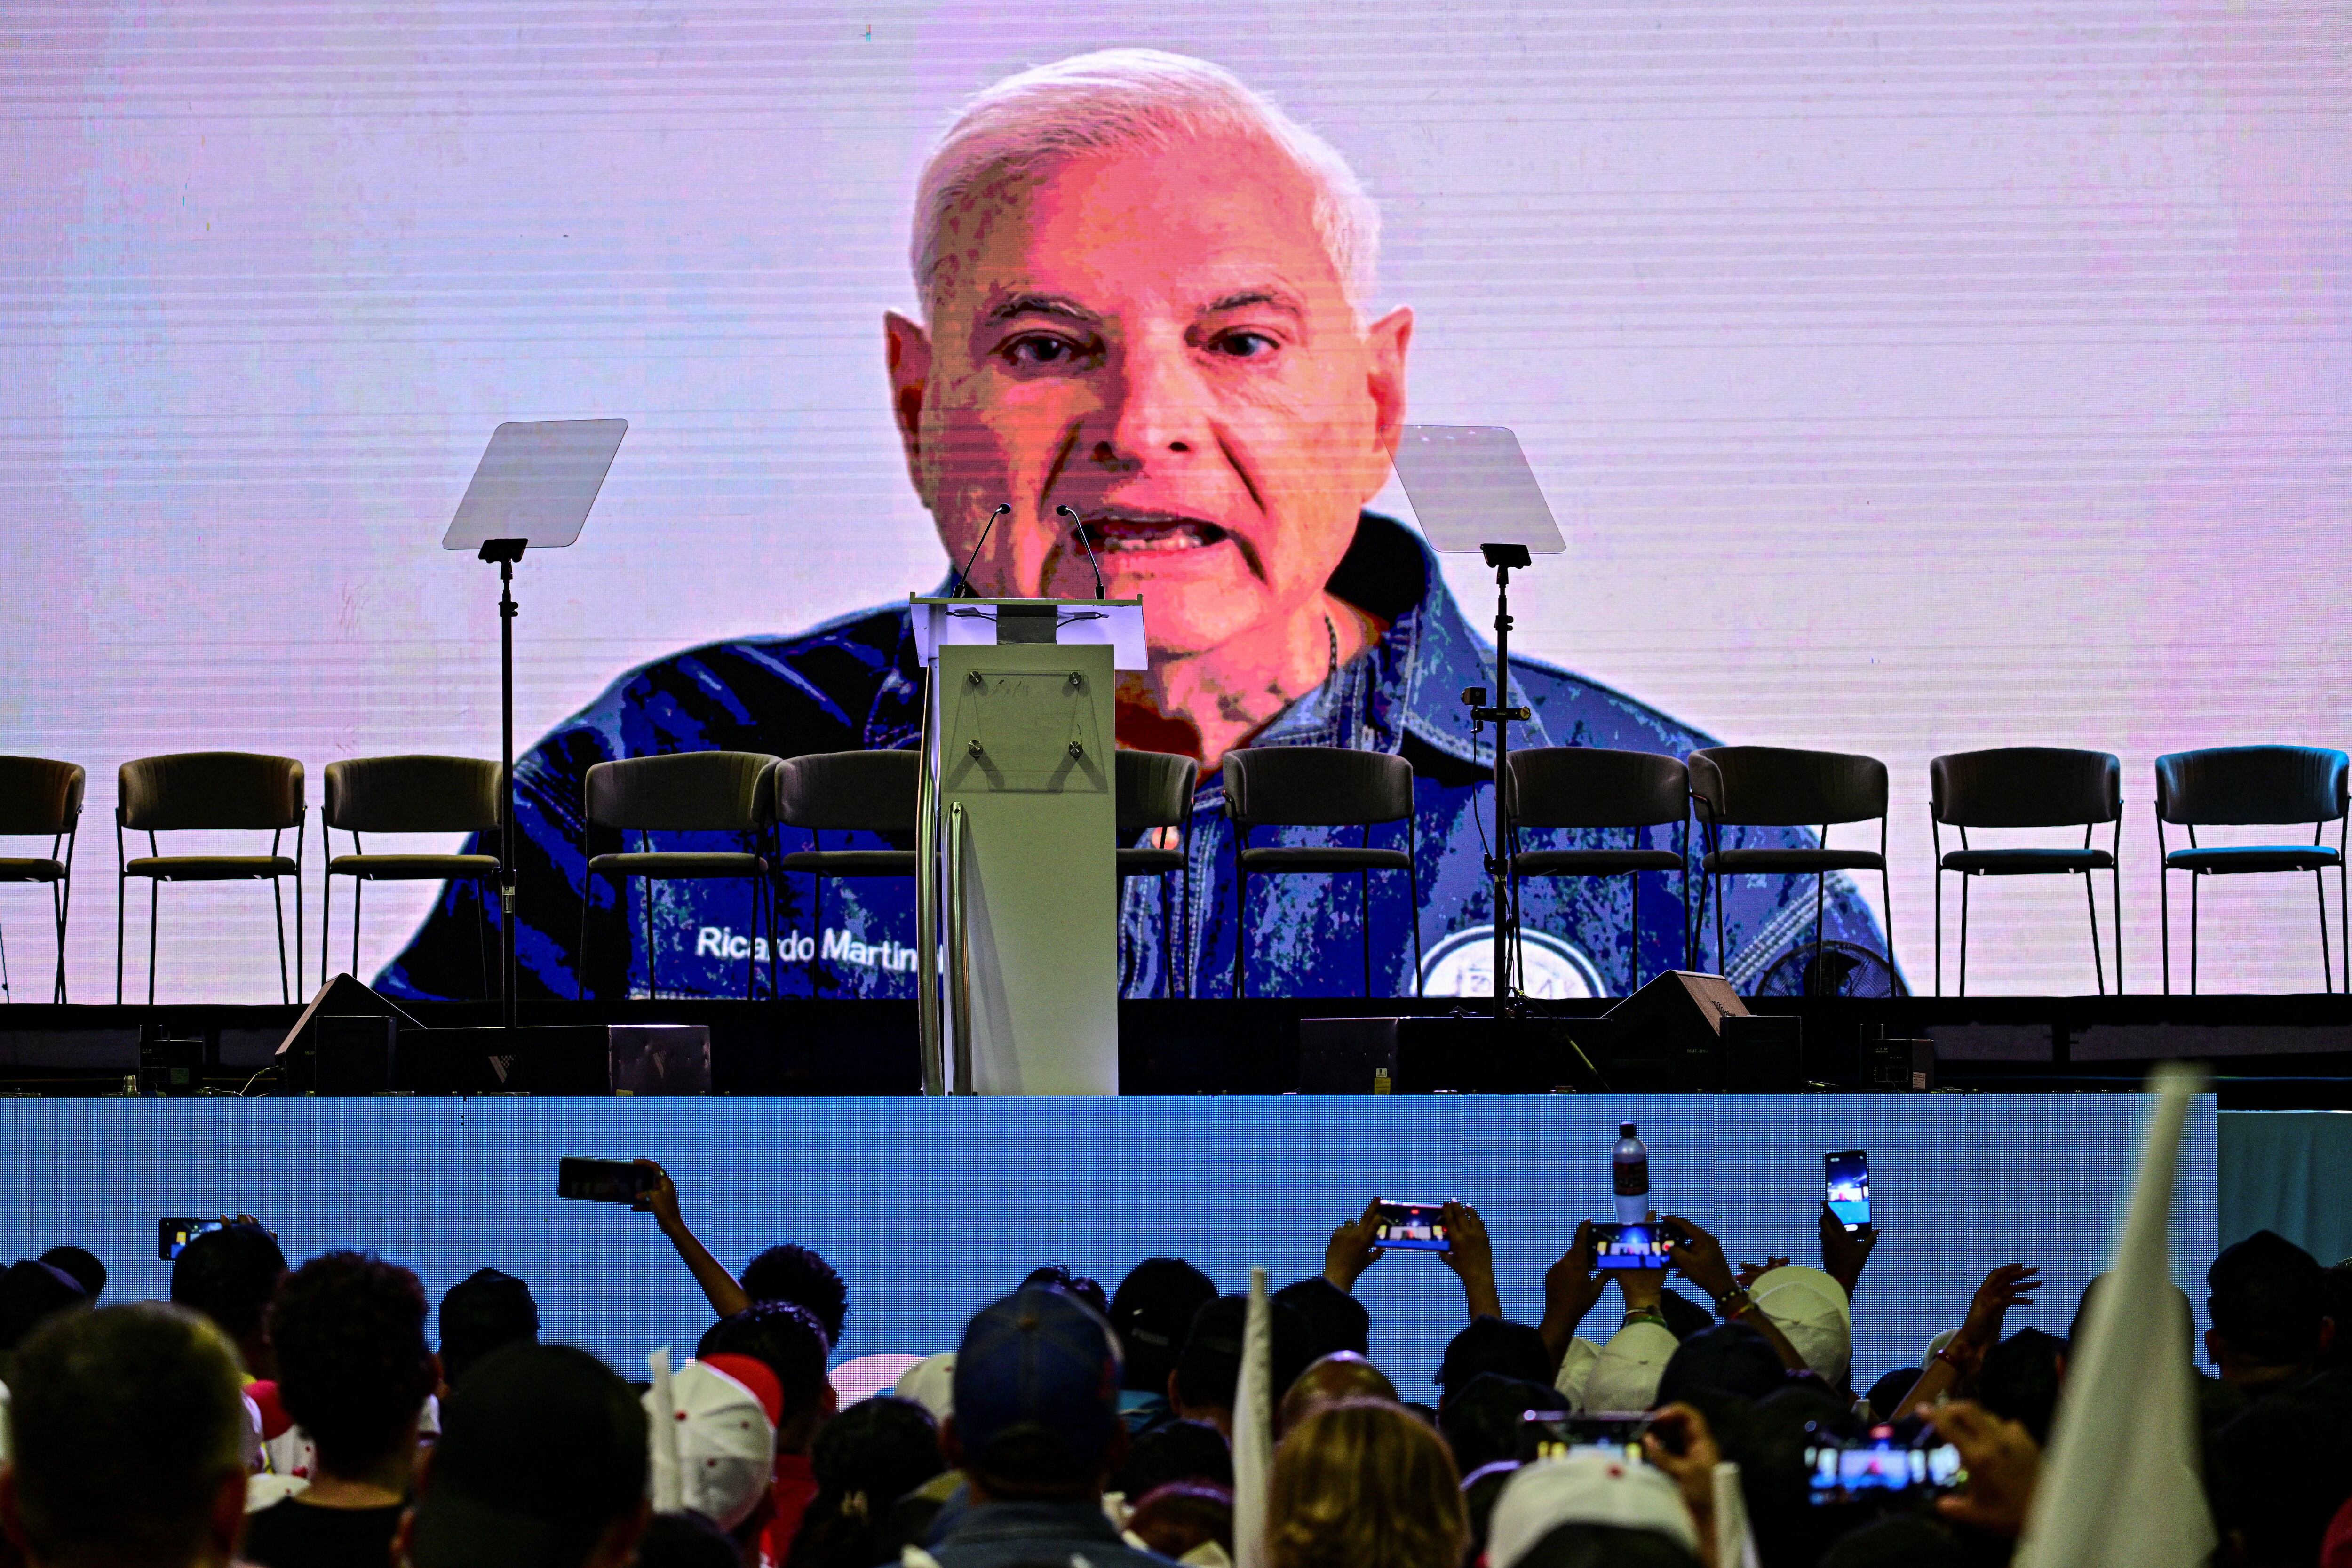 The former president of Panama (2009-2014) Ricardo Martinelli – who requested asylum at the Nicaraguan embassy – gives an online speech in support of the presidential candidate of the Realizing Goals party, José Raúl Mulino.  (Photo by MARTIN BERNETTI/AFP).